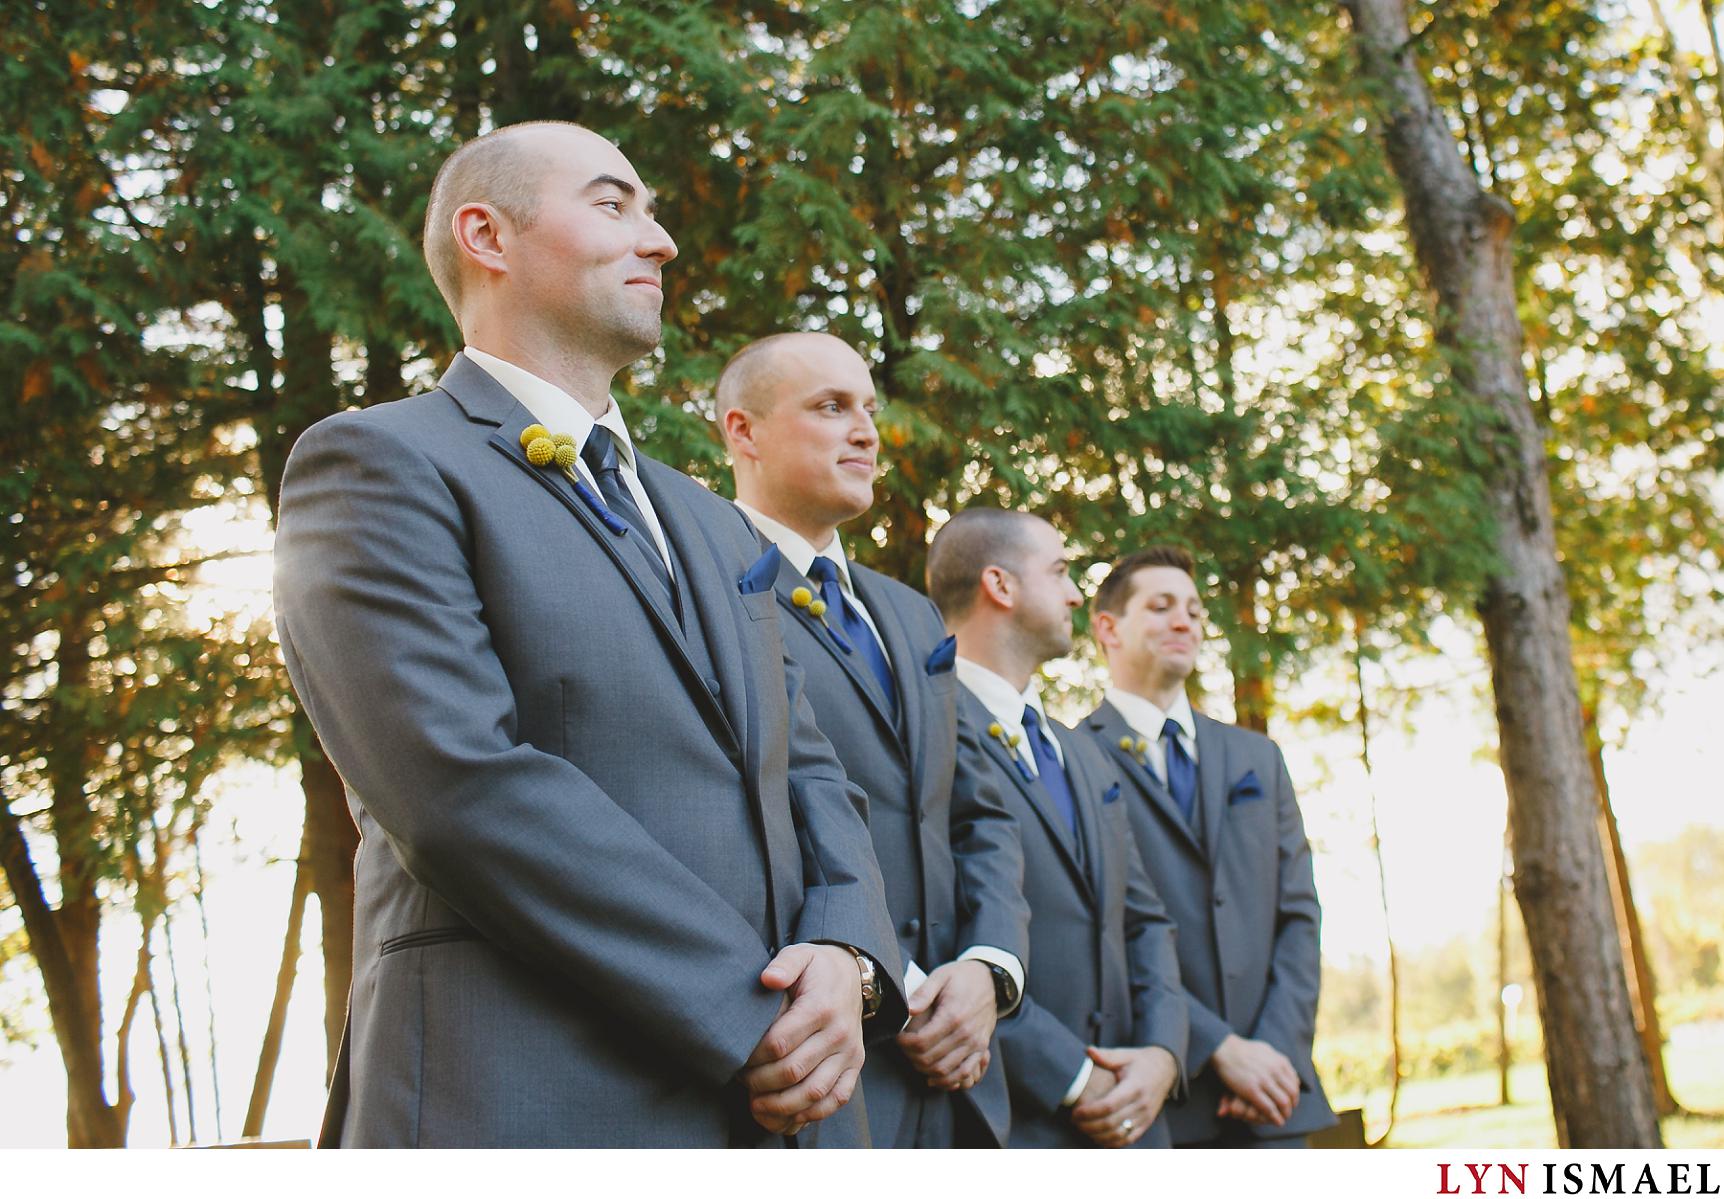 Groom waits for his bride to walk down the aisle at their Holland Marsh Wineries wedding.